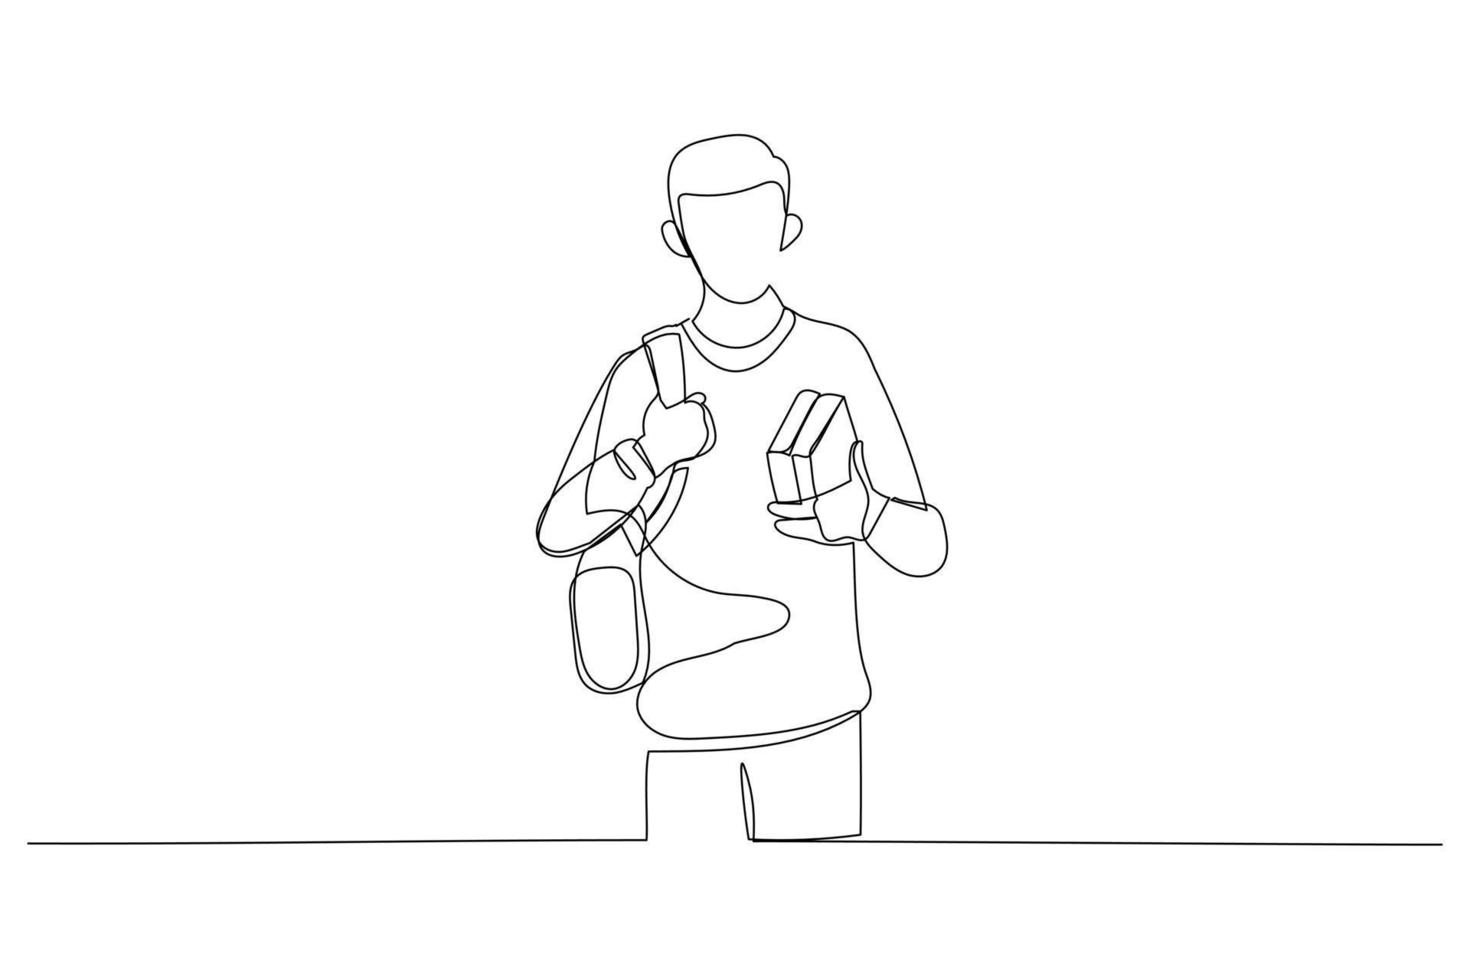 Illustration of young teenager with school backpack and books. Single line art style vector